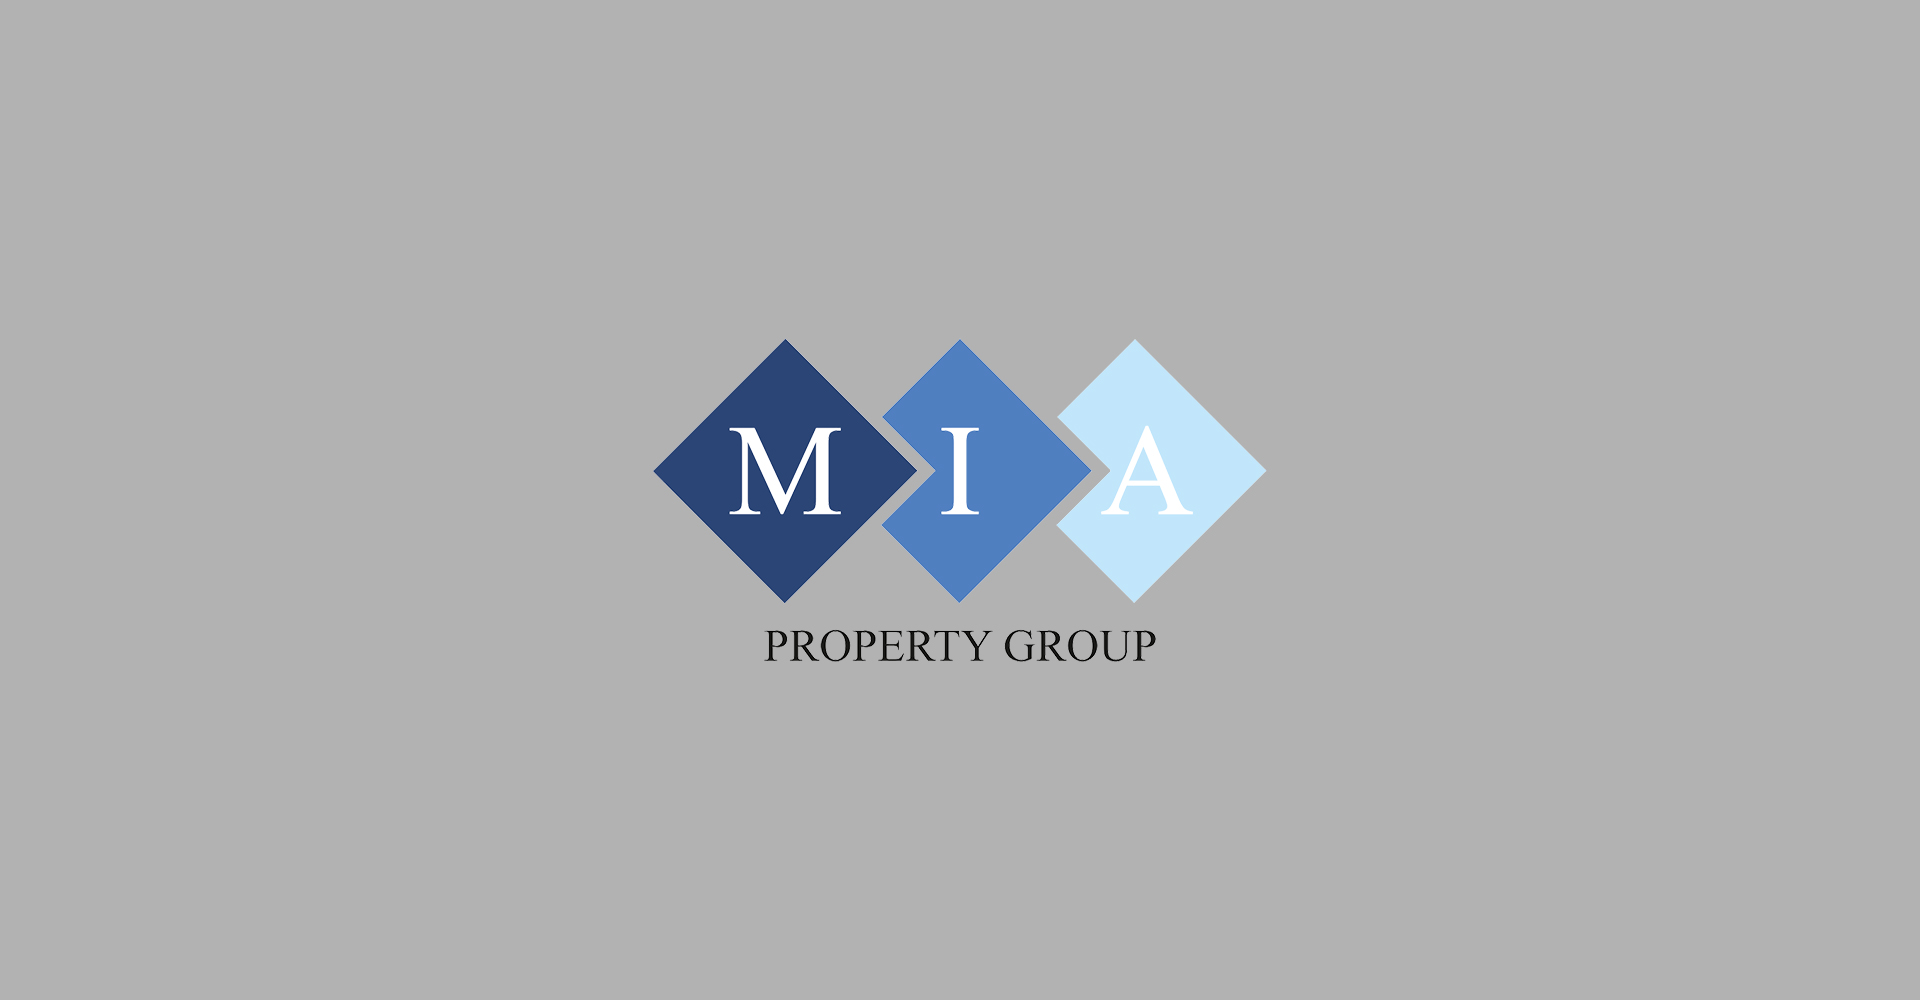 The logo for mia property group, focused on office branding.